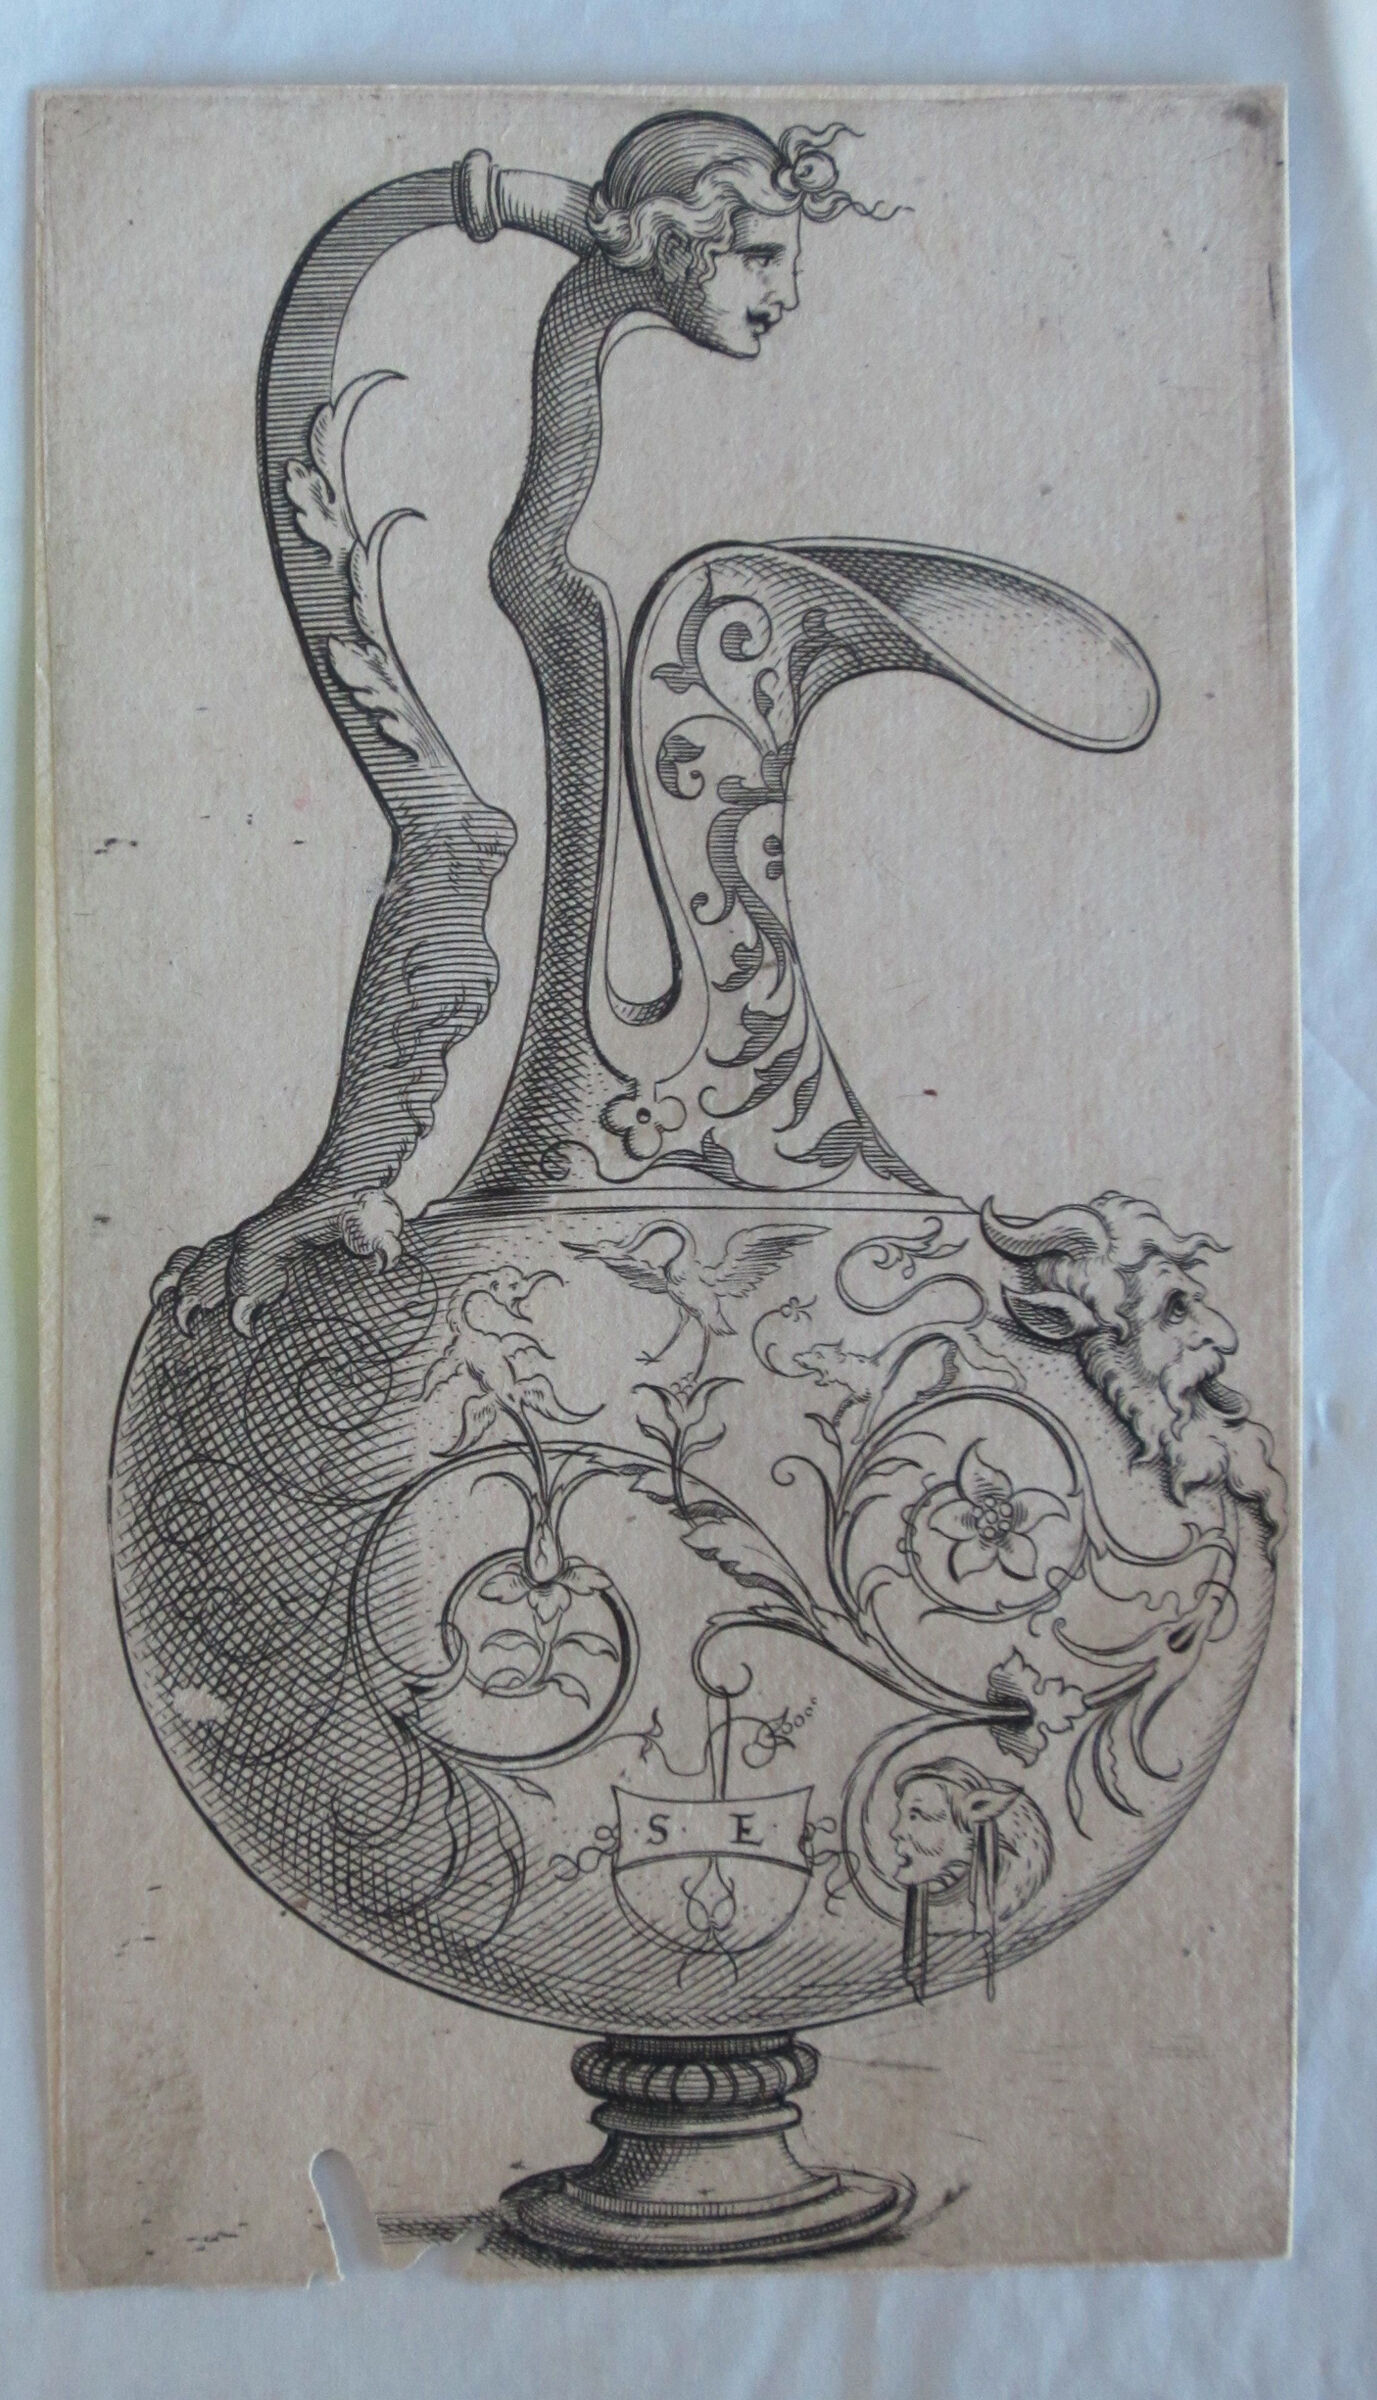 Ewer With Foliate Scrolls, The Head Of A Satyr, And A Tablet With The Initials S E